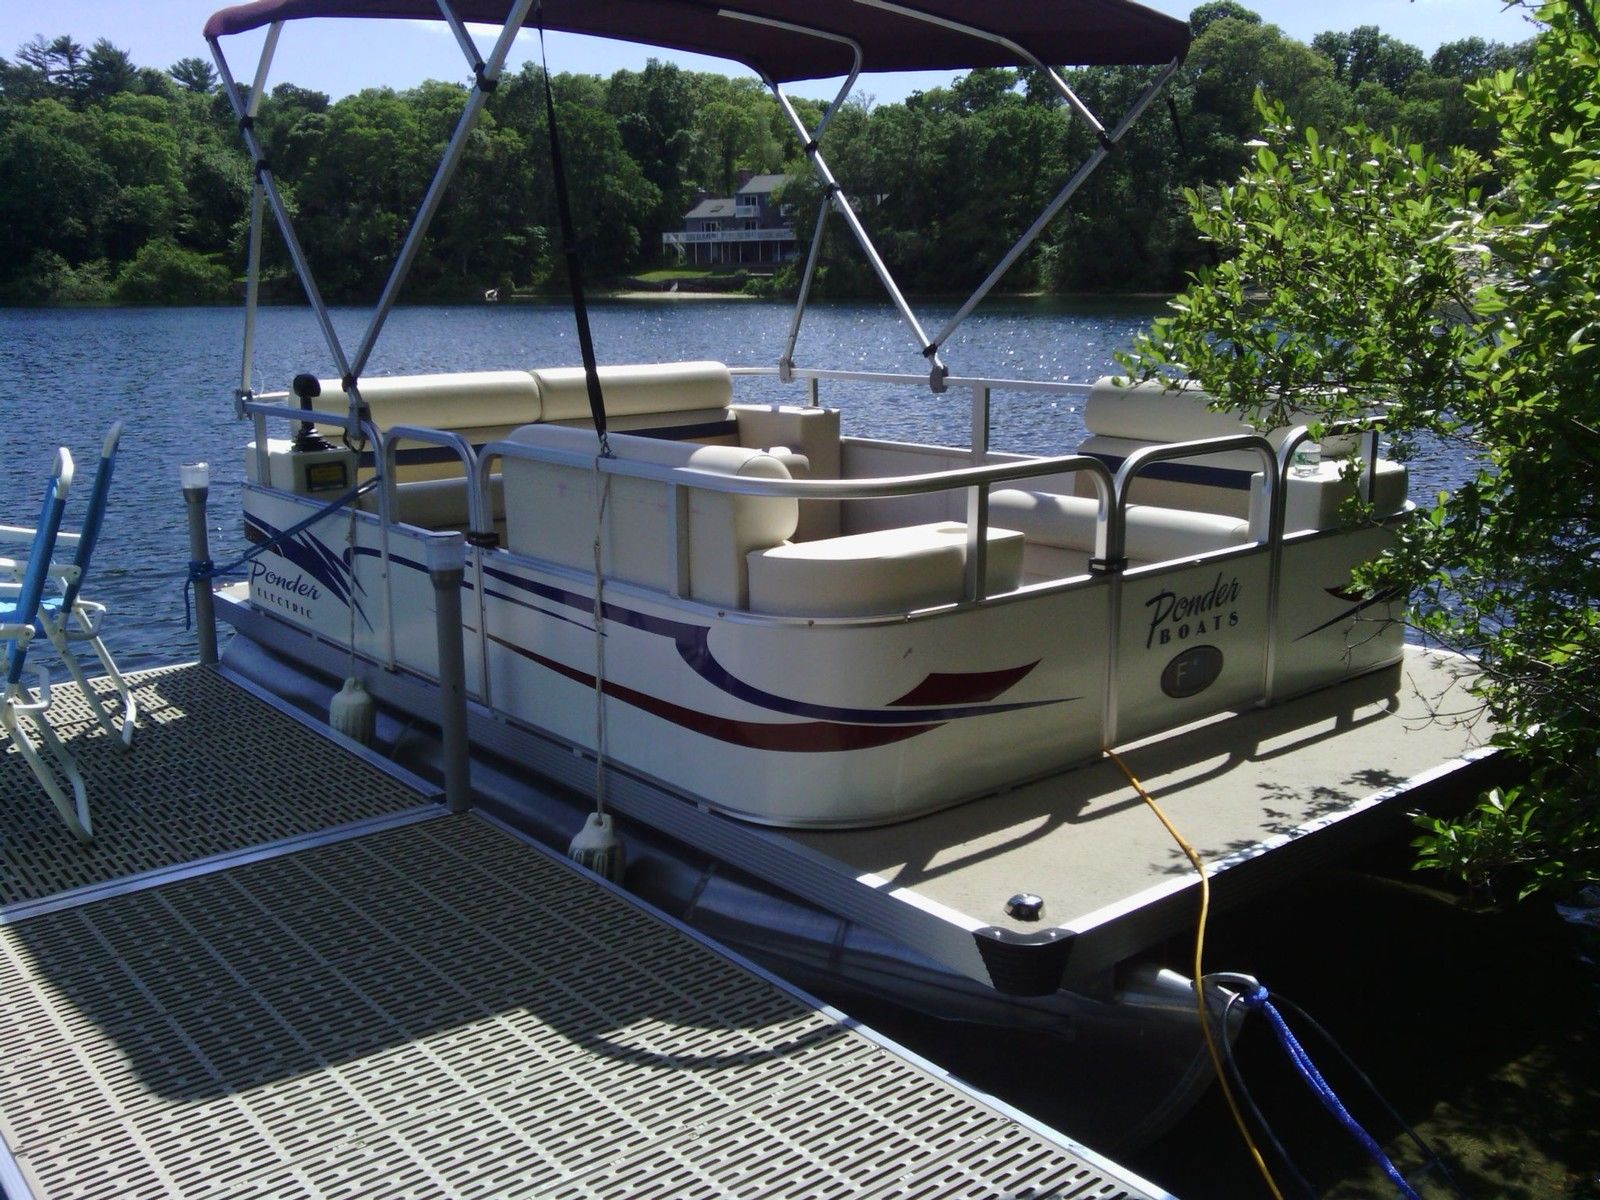 ponder 148 wide body 2010 for sale for $100 - boats-from